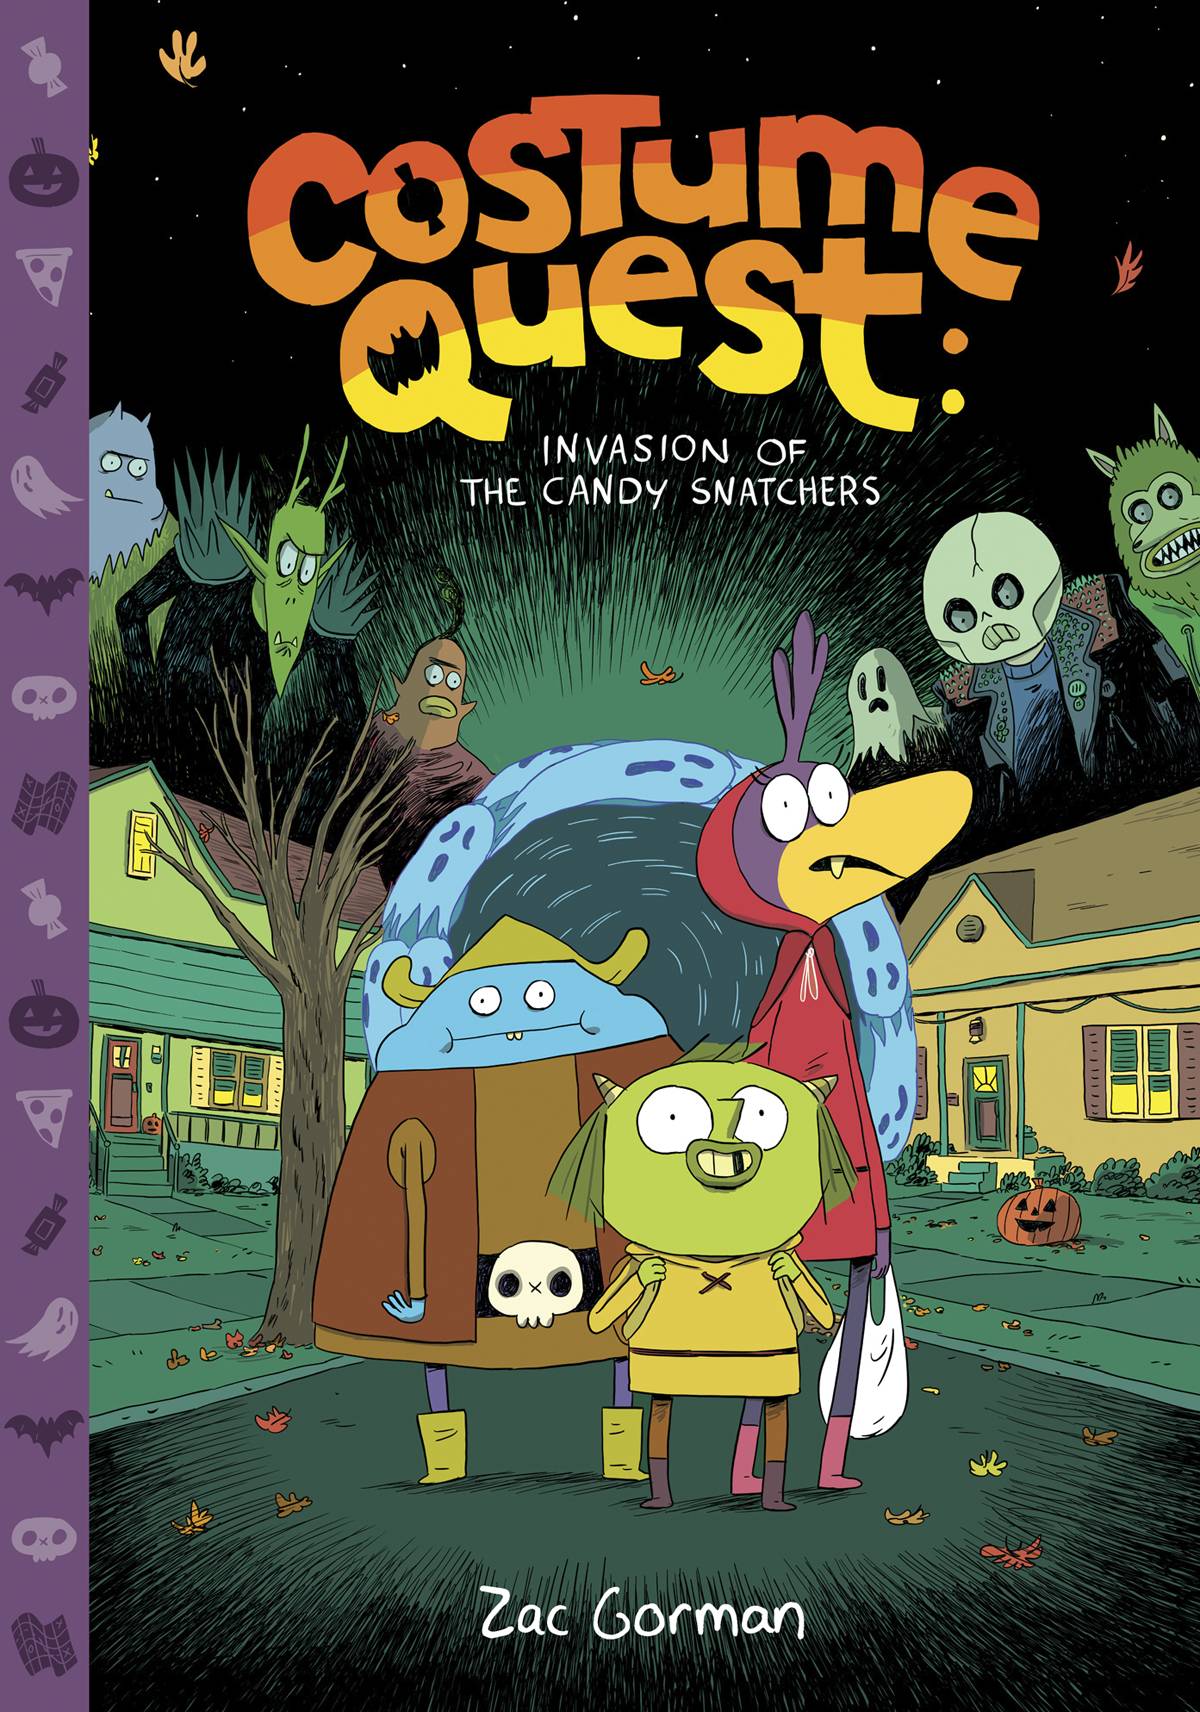 Costume Quest Hardcover Invasion of Candy Snatchers